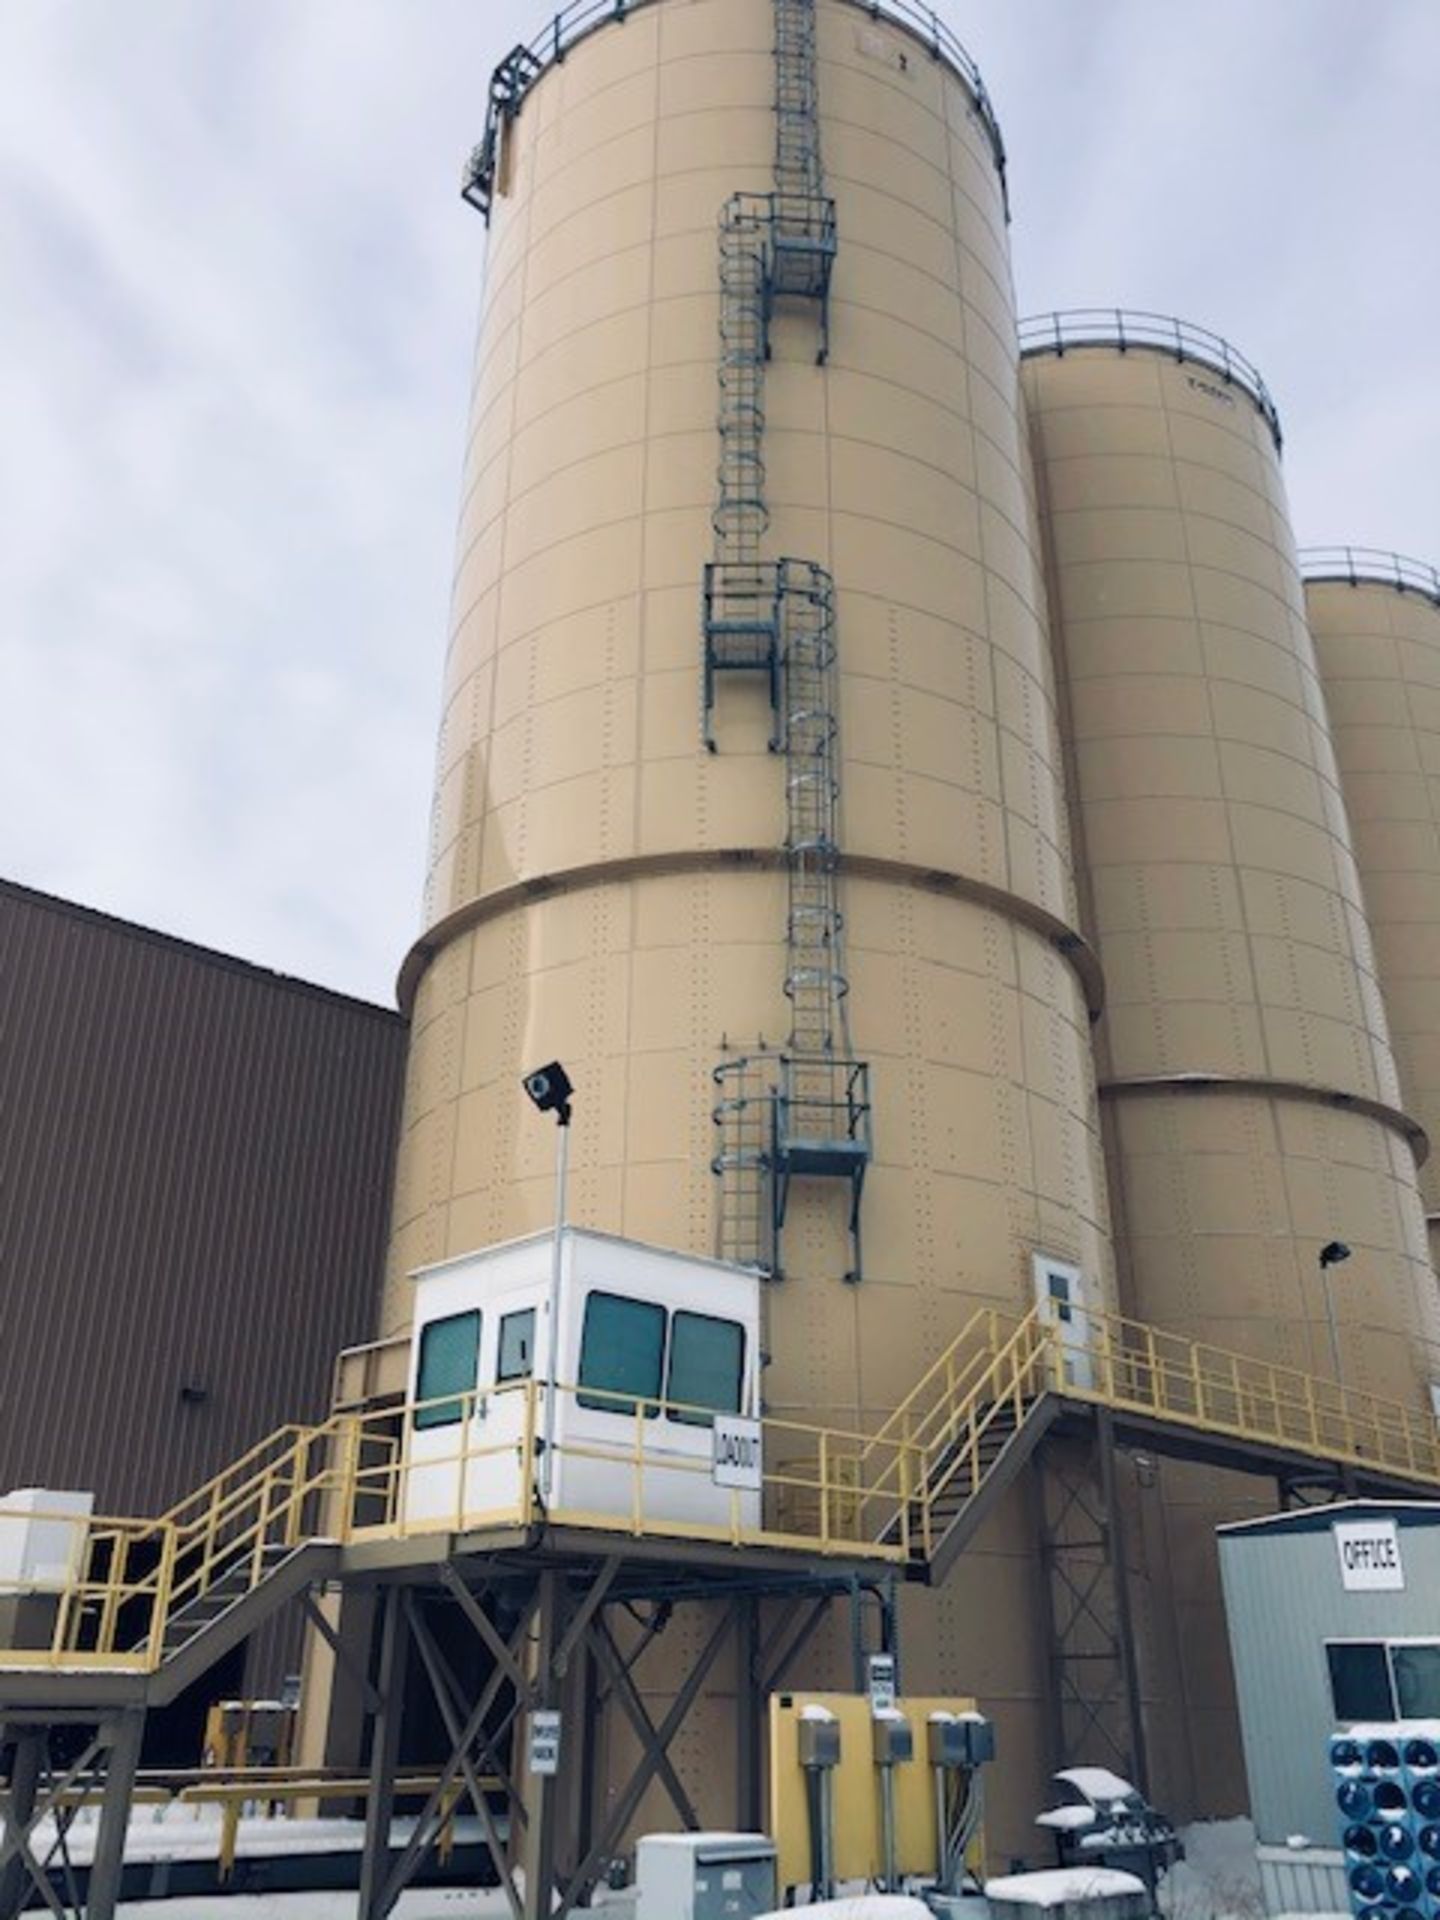 3,000-Ton Silo; Bolted Steel Construction, Cone Bottom, Bottom Drive Through Loading - Subj to Bulk - Image 3 of 4